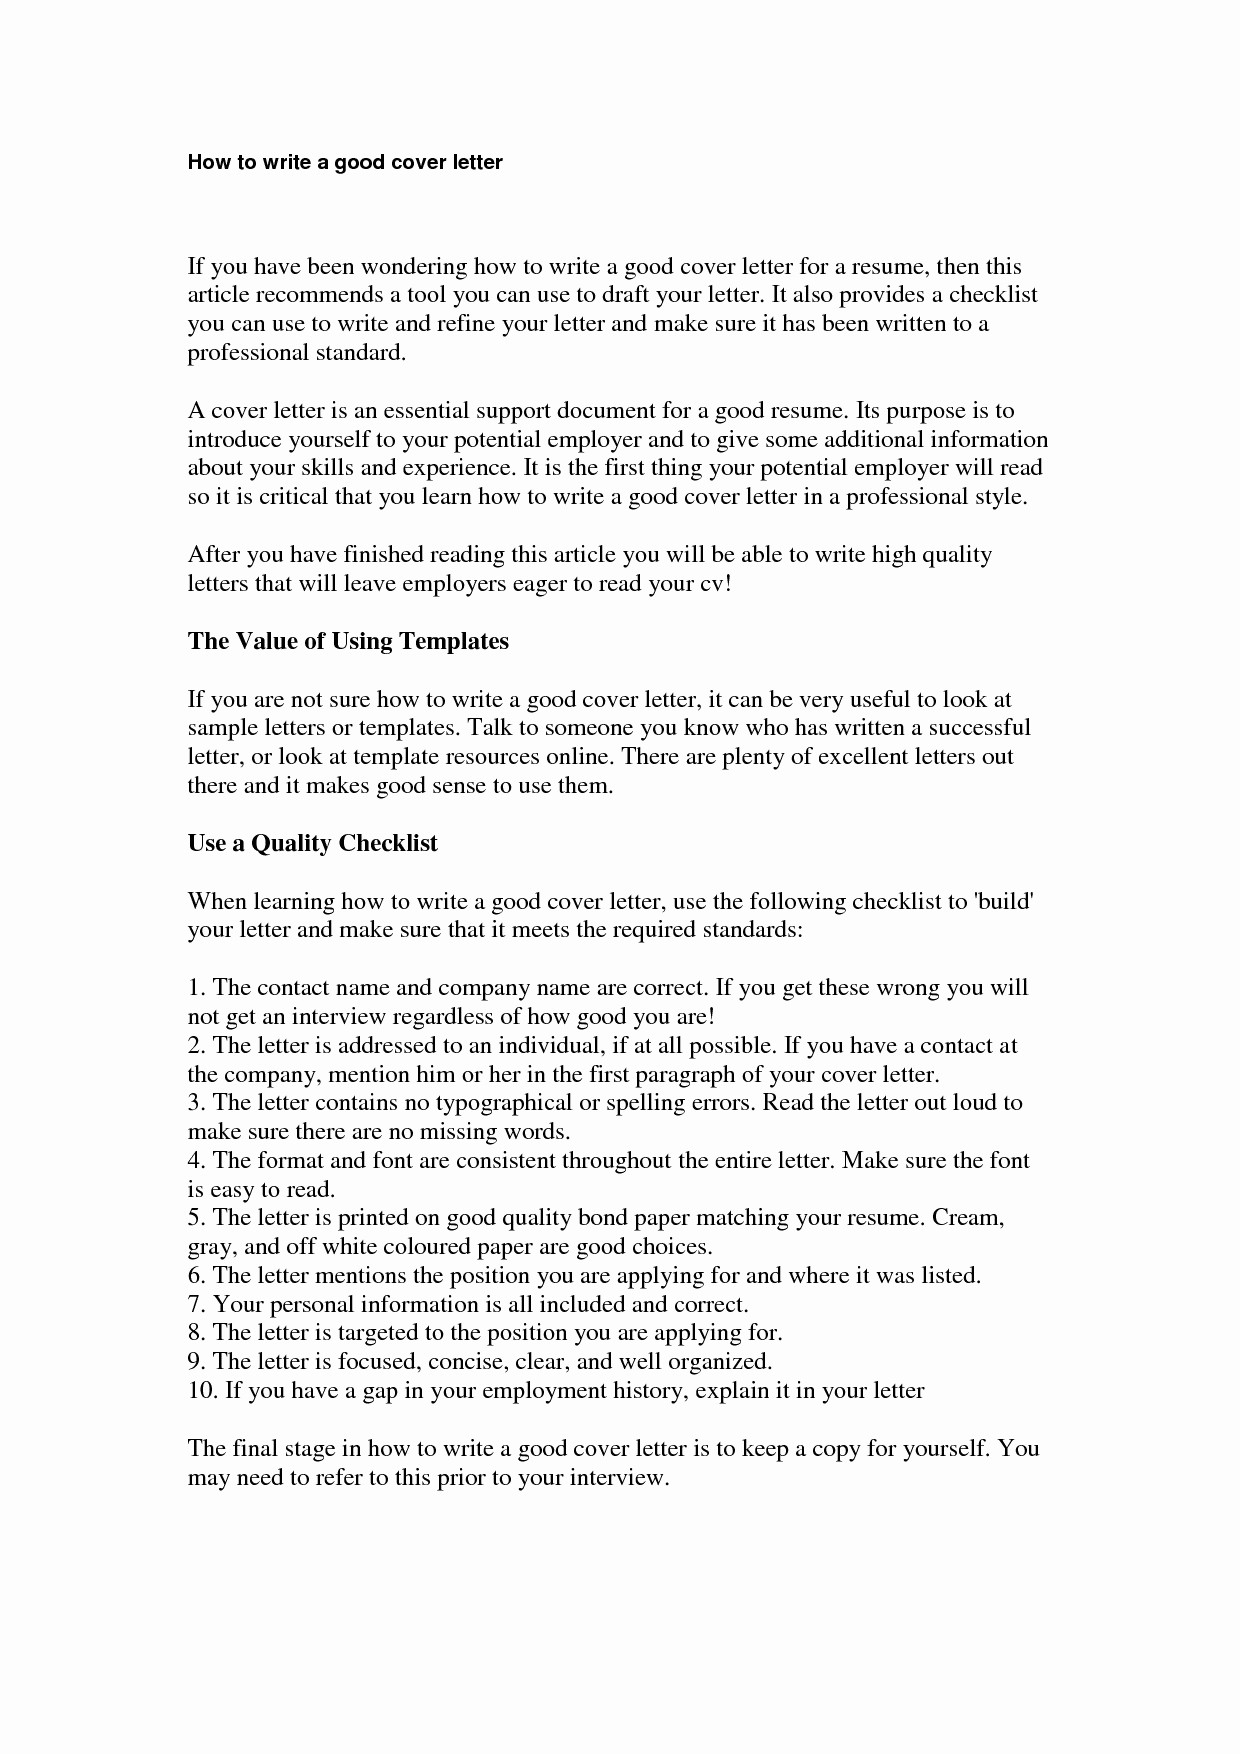 How to Cover Letter Template Awesome How to Write A Good Cover Letter